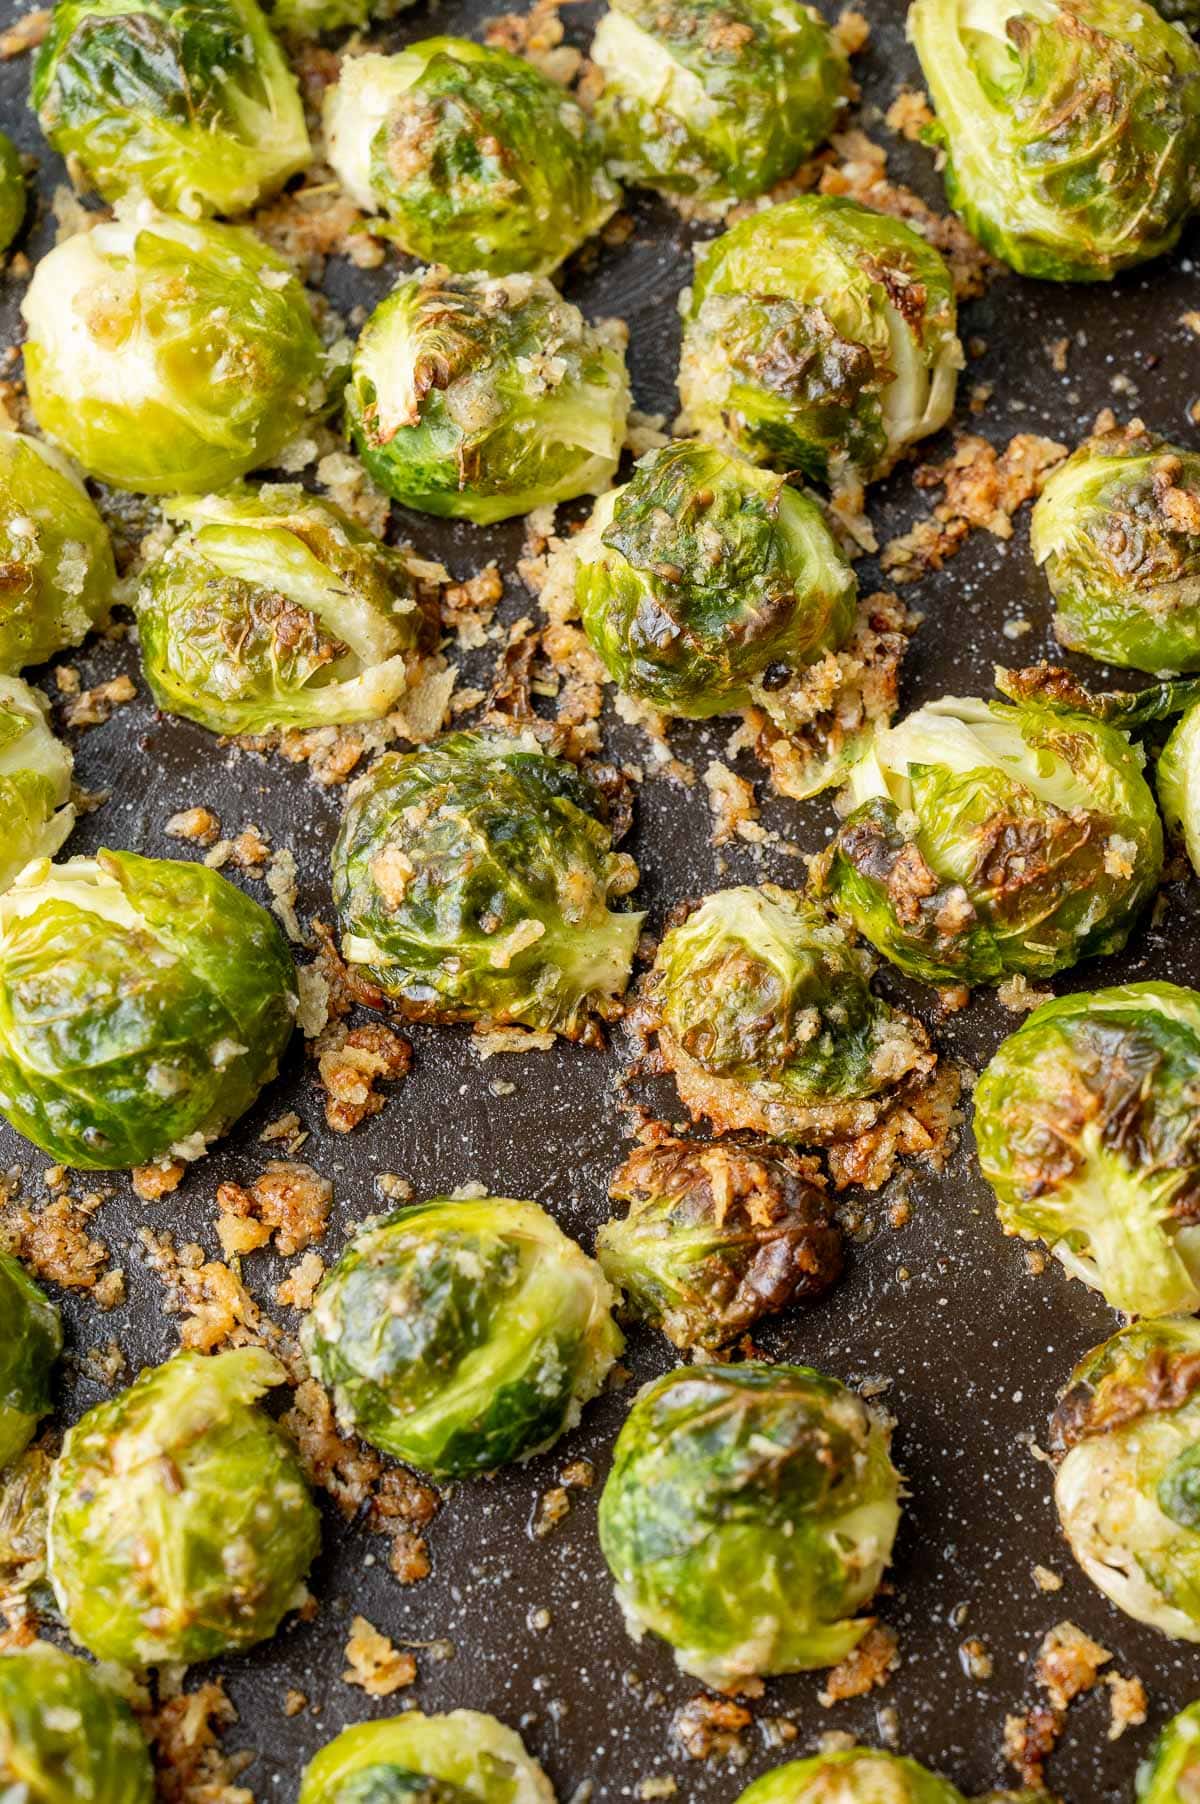 Parmesan roasted brussel sprouts on a black baking sheet.